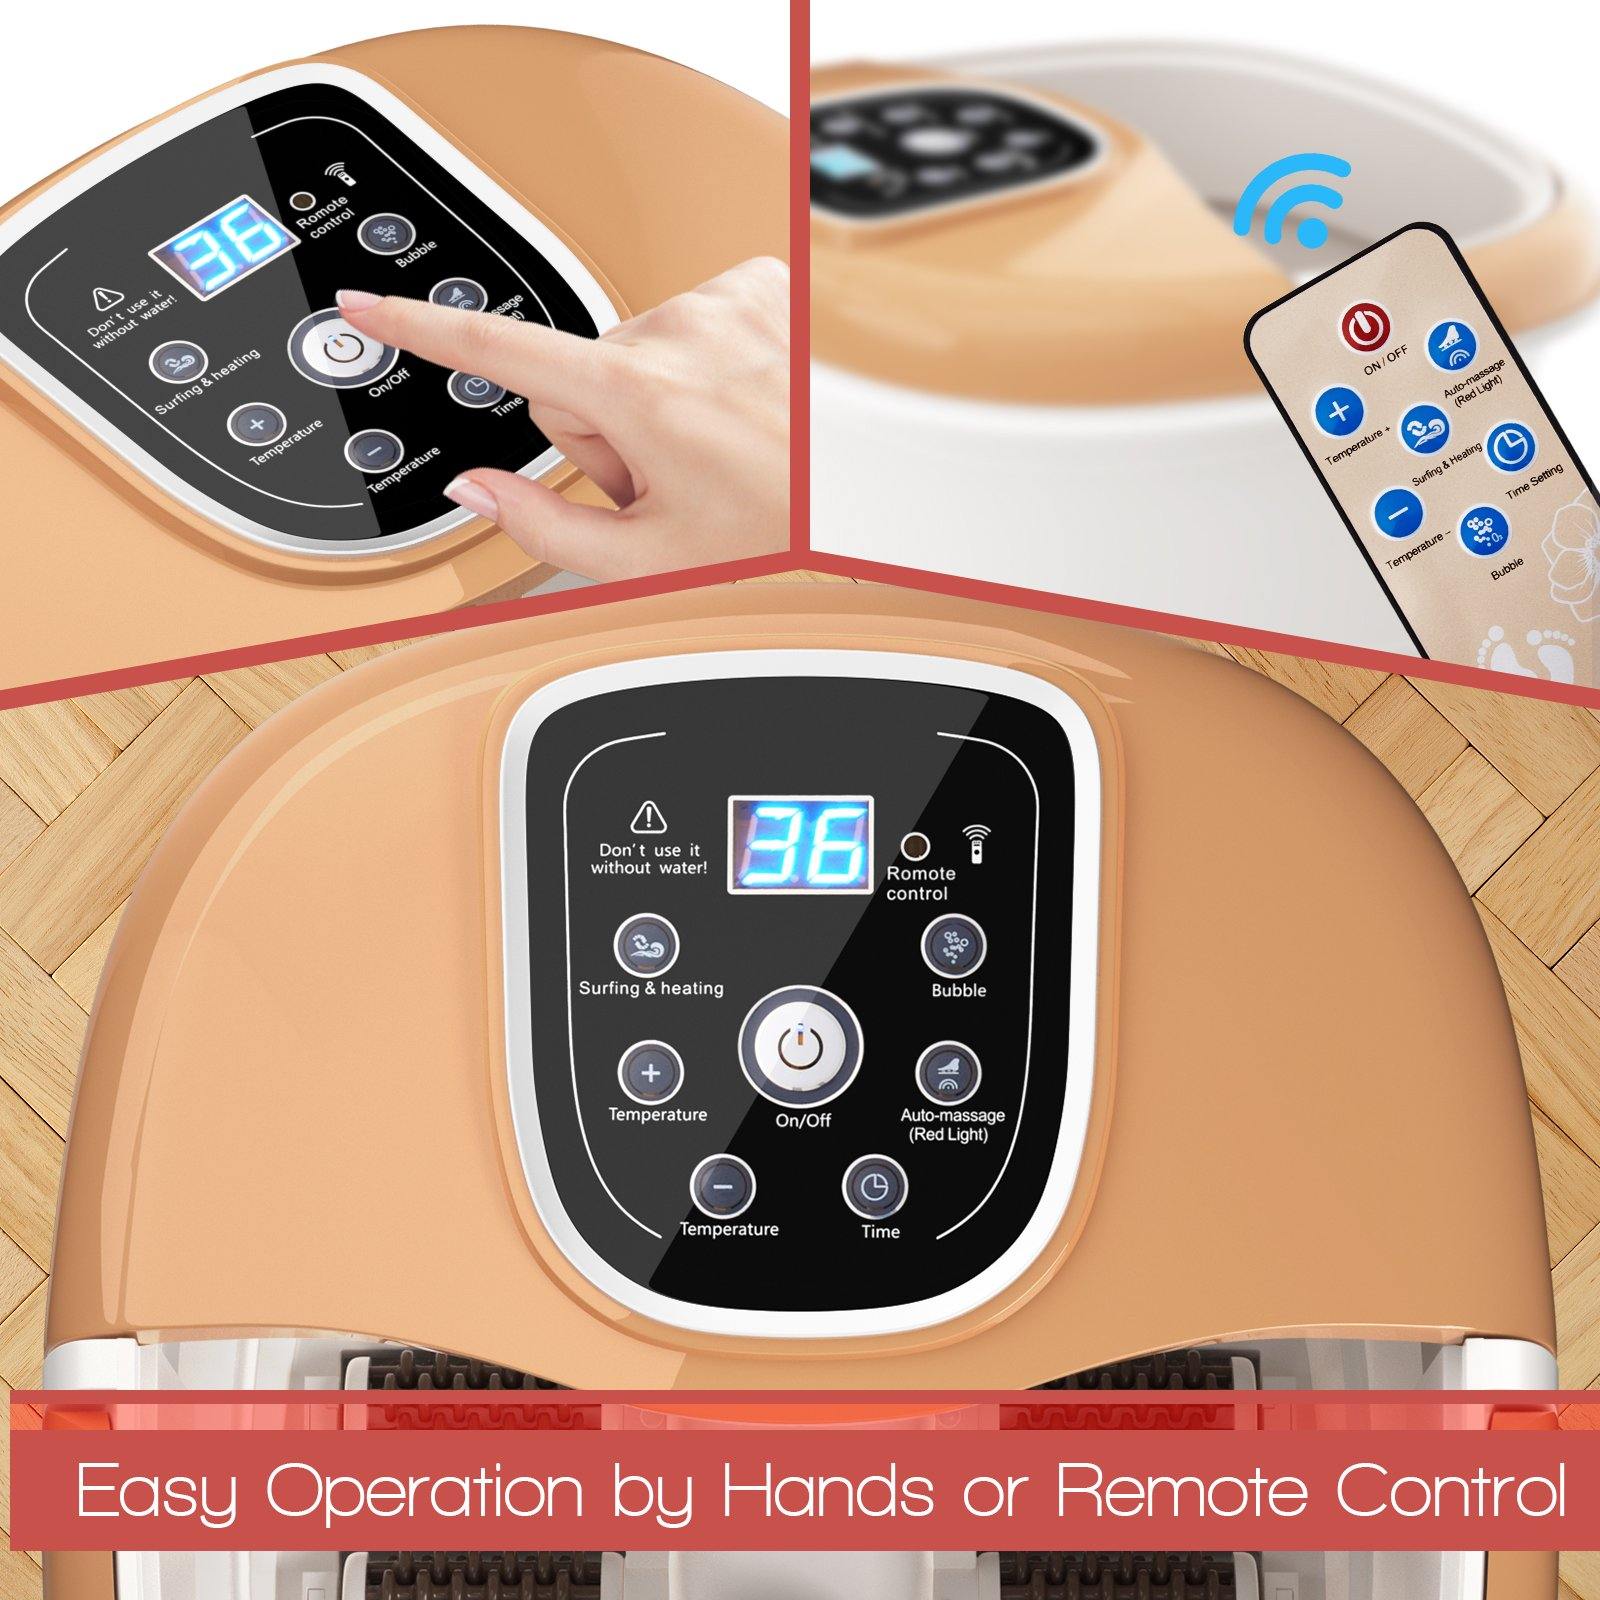 All in One Foot Spa Bath Massager - Giantex